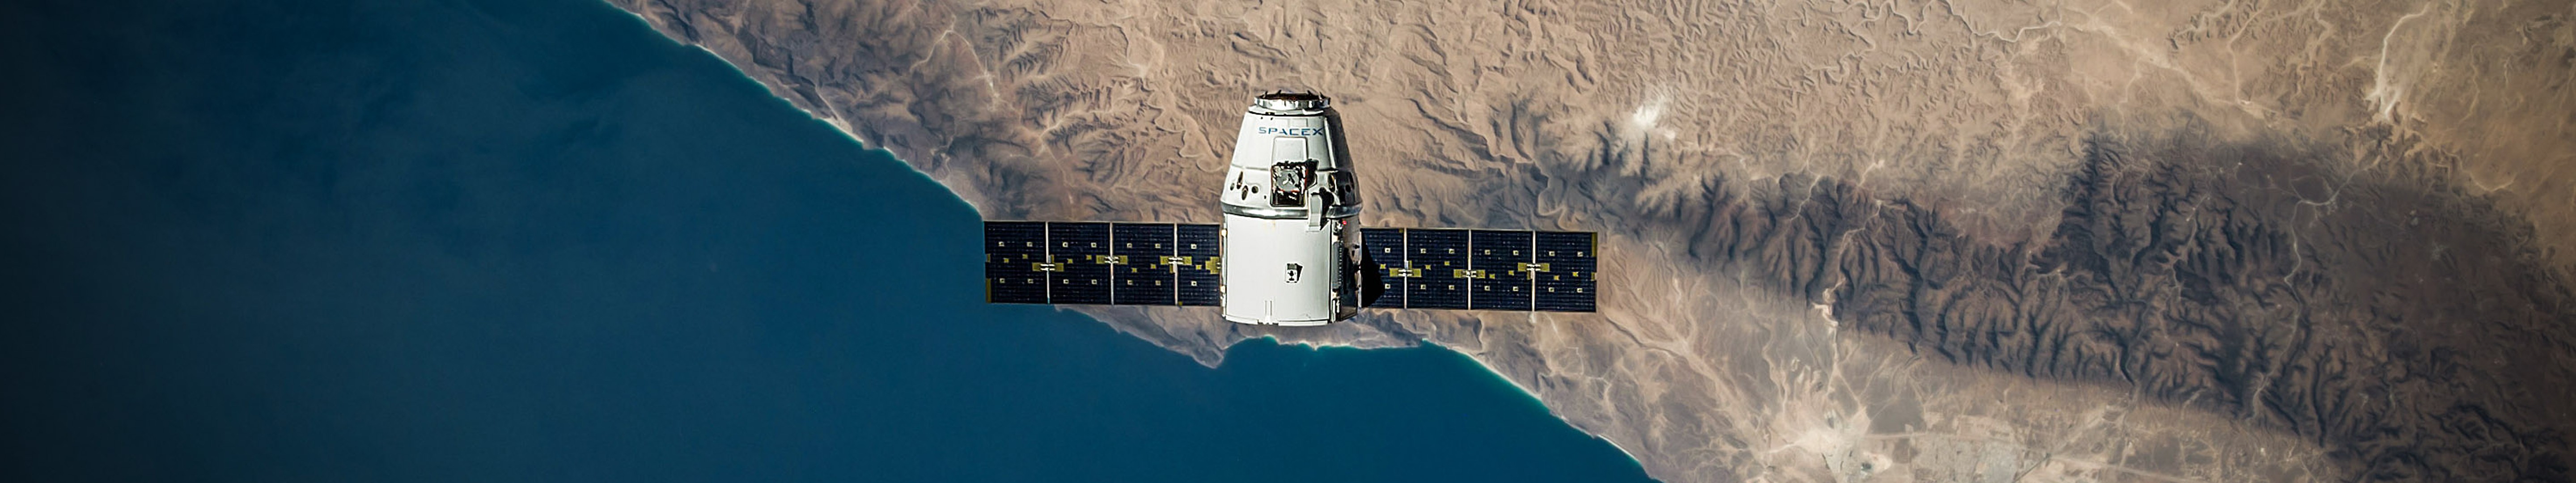 SpaceX ISS Suply Ship Satelites Shore Water Desert Space 5760x1080